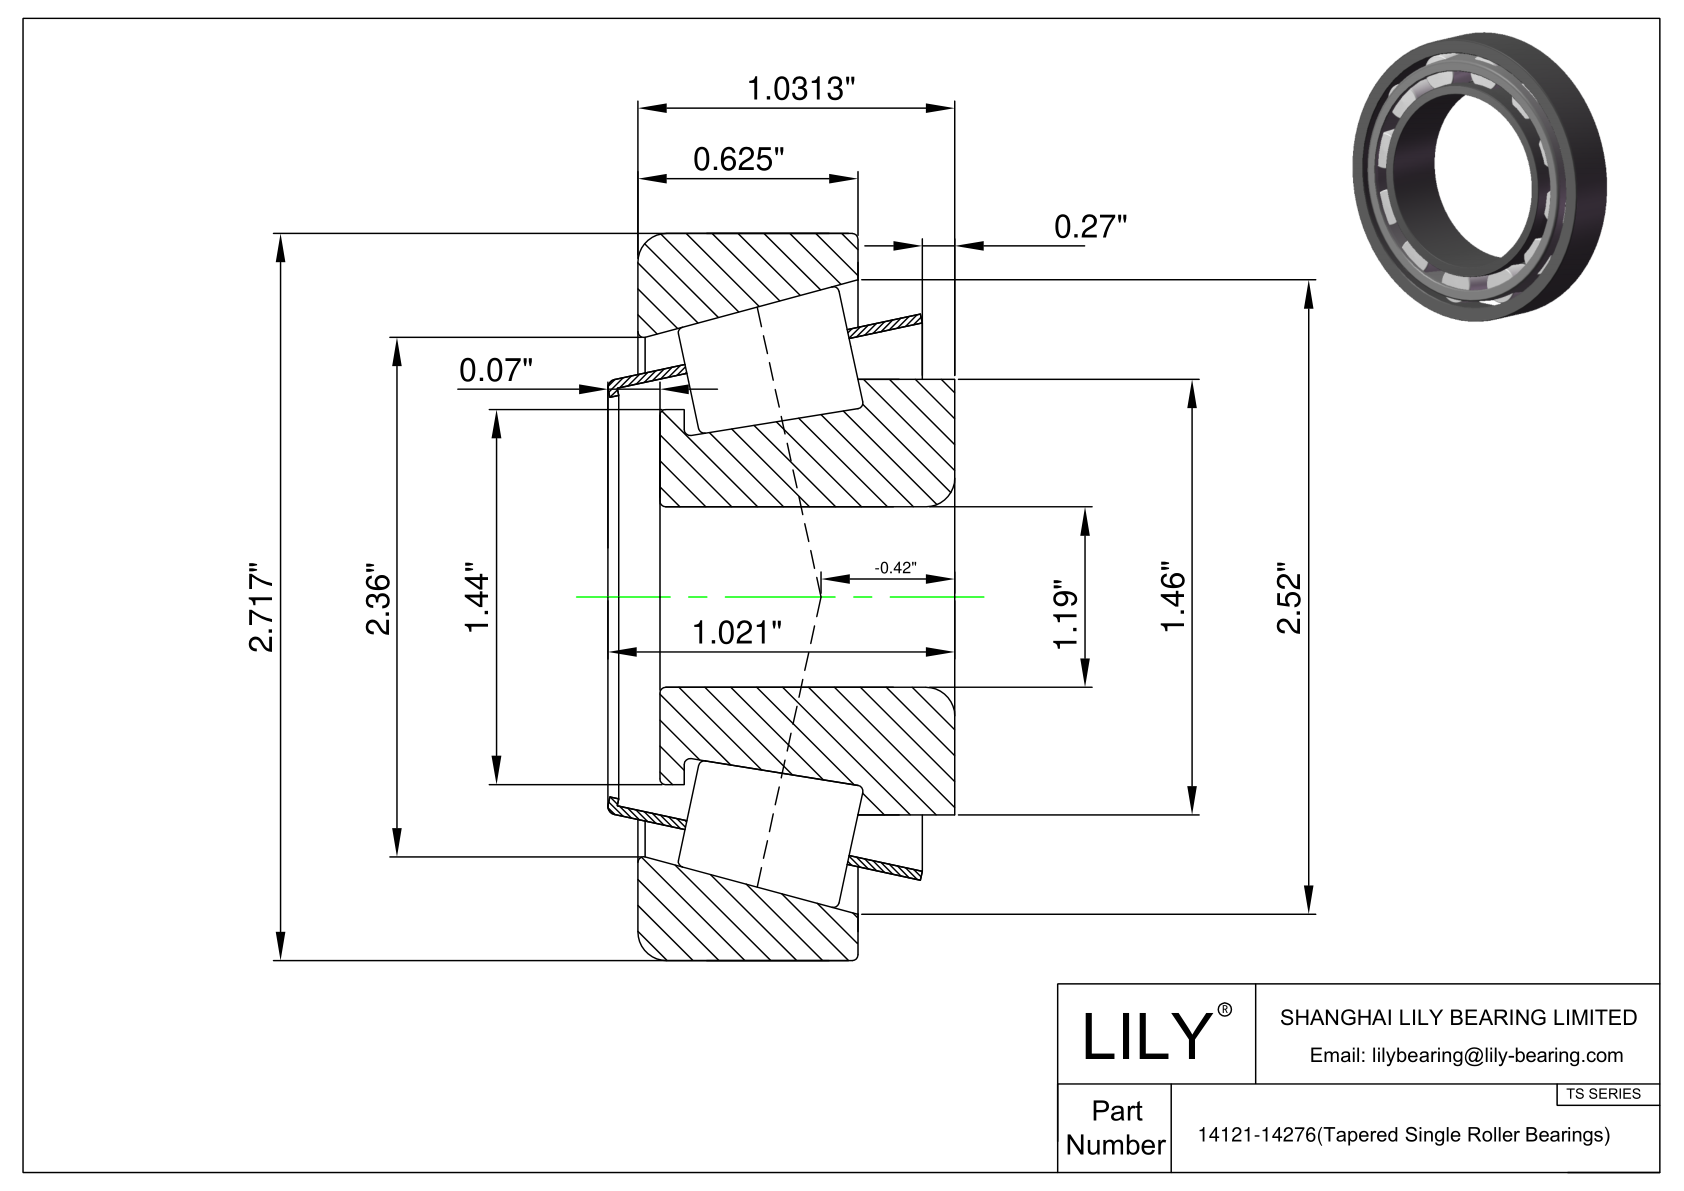 14121-14276 TS (Tapered Single Roller Bearings) (Imperial) cad drawing